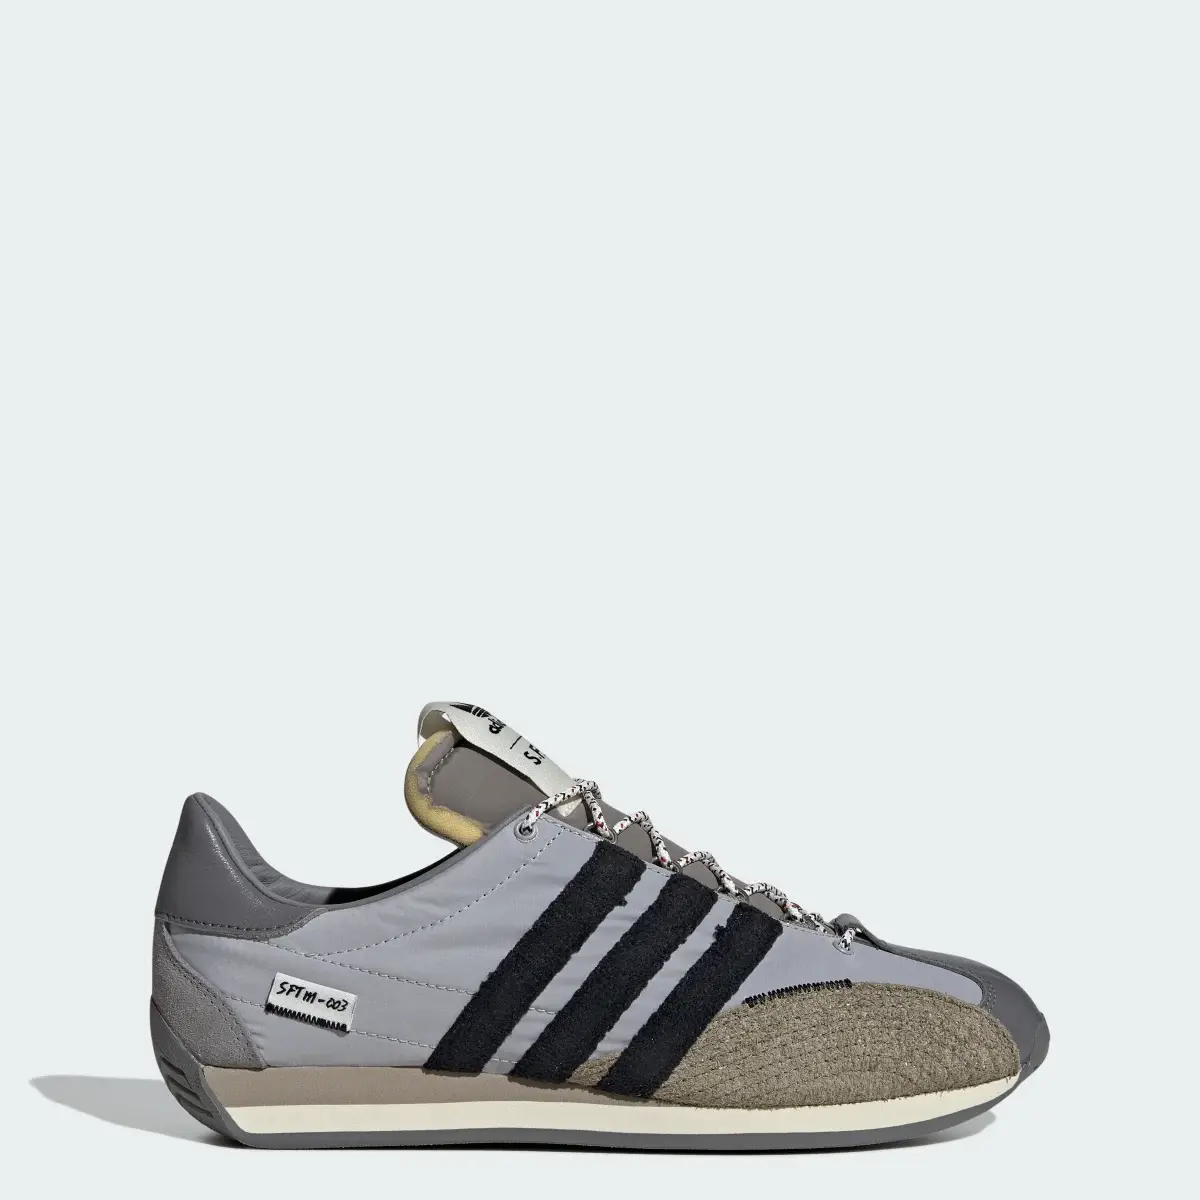 Adidas SFTM Country OG Low Trainers. 1